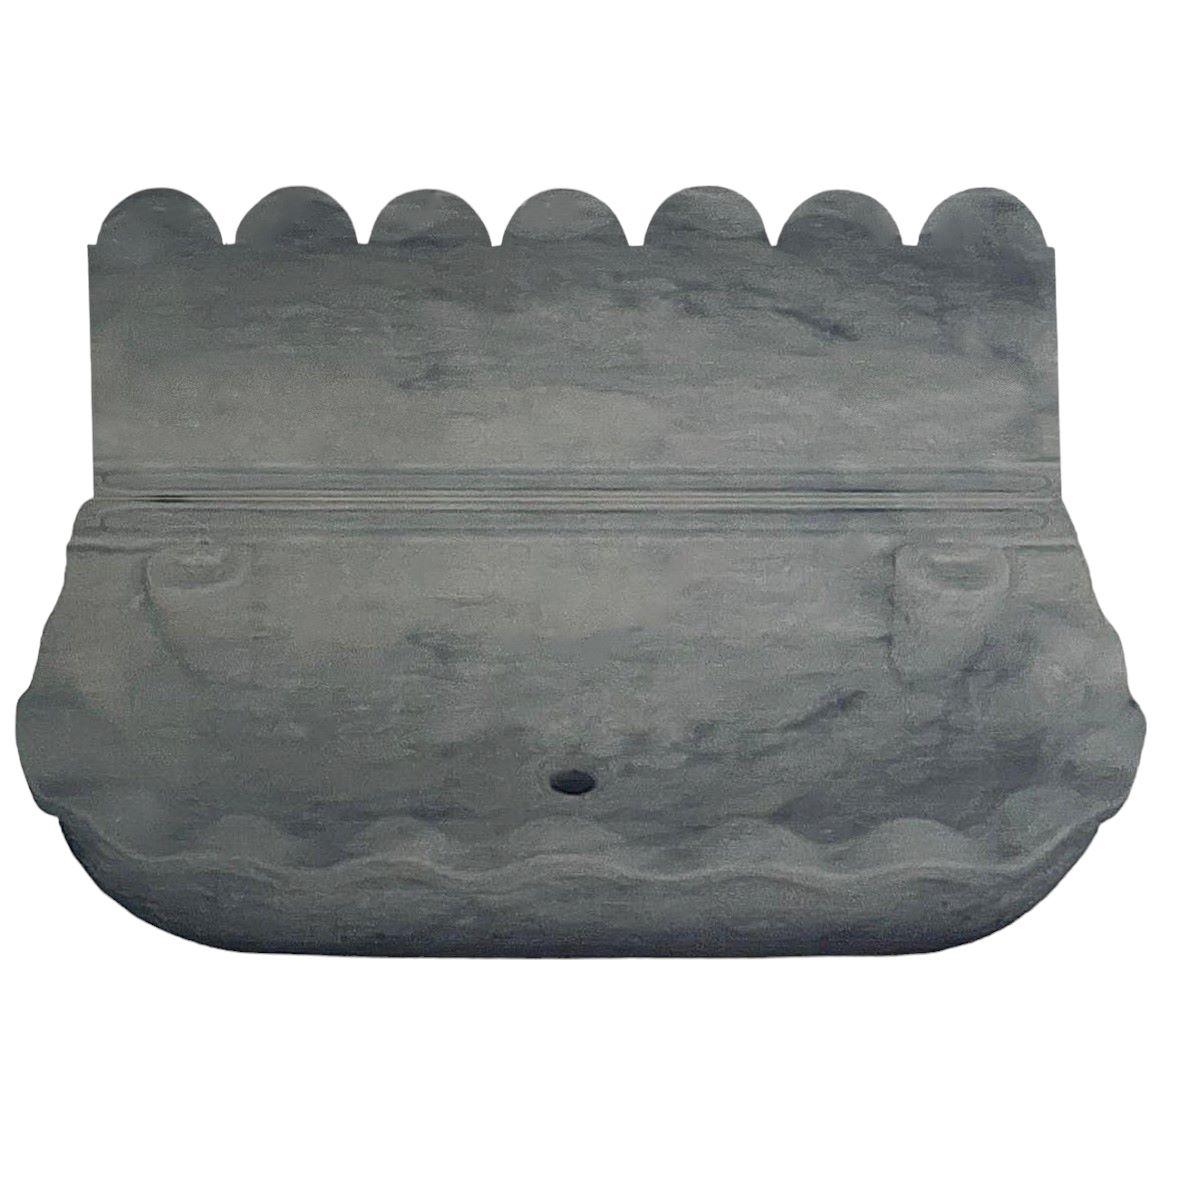 Classical Carrara Marble Stone Sink For Sale 3